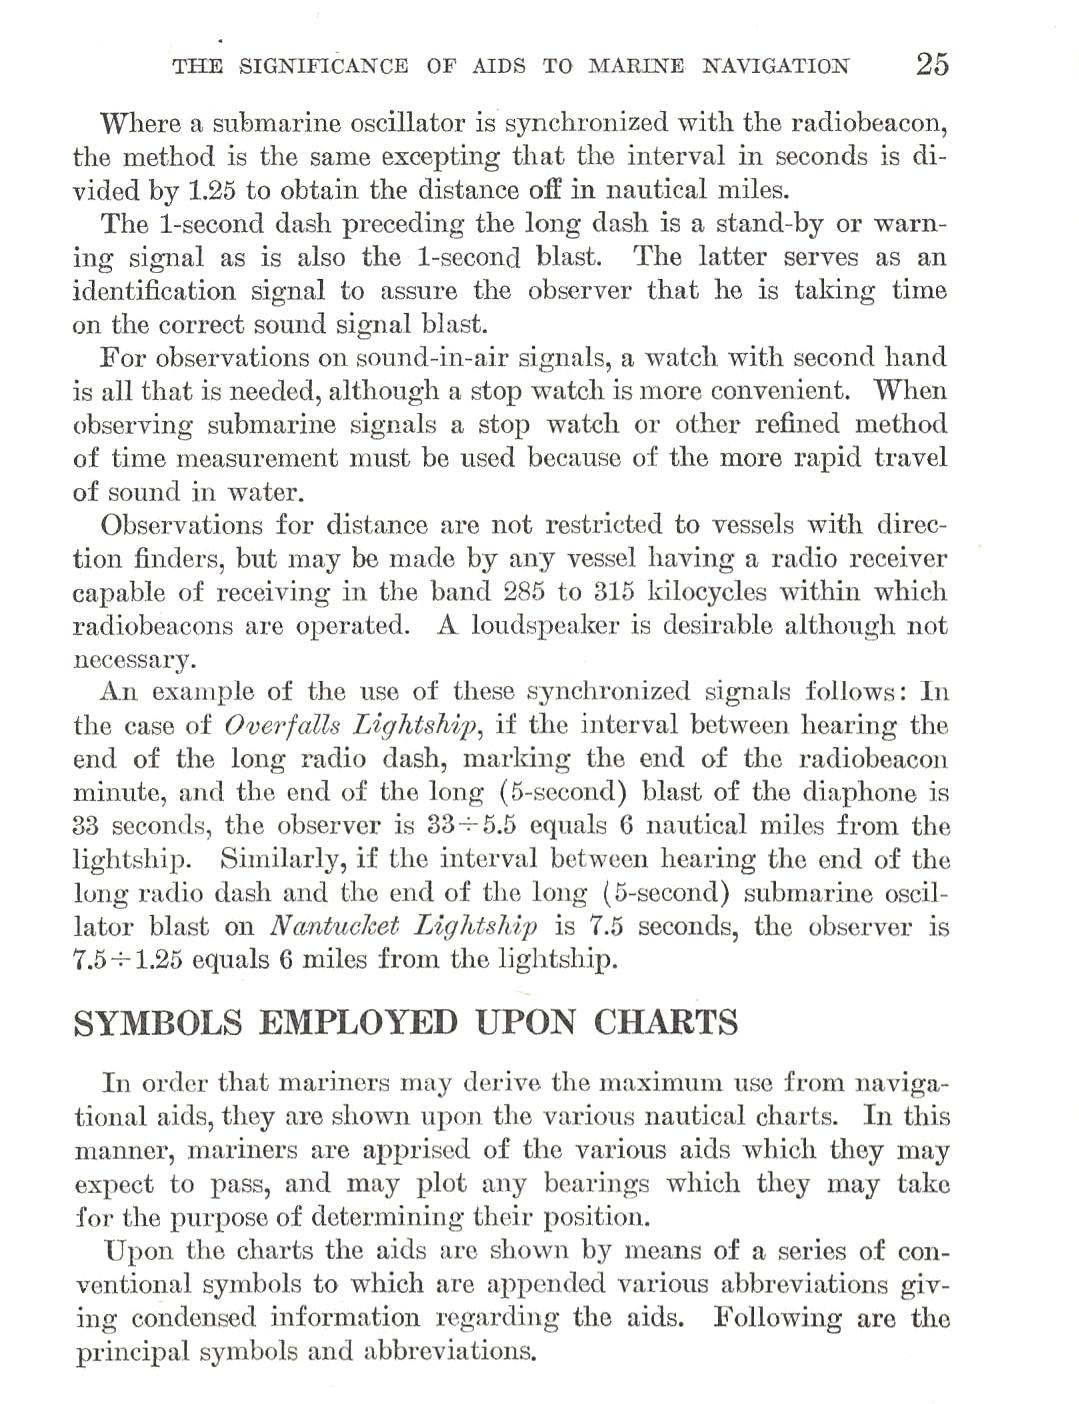 US Coast Guard- Significance of Aids to Navigation - 1943